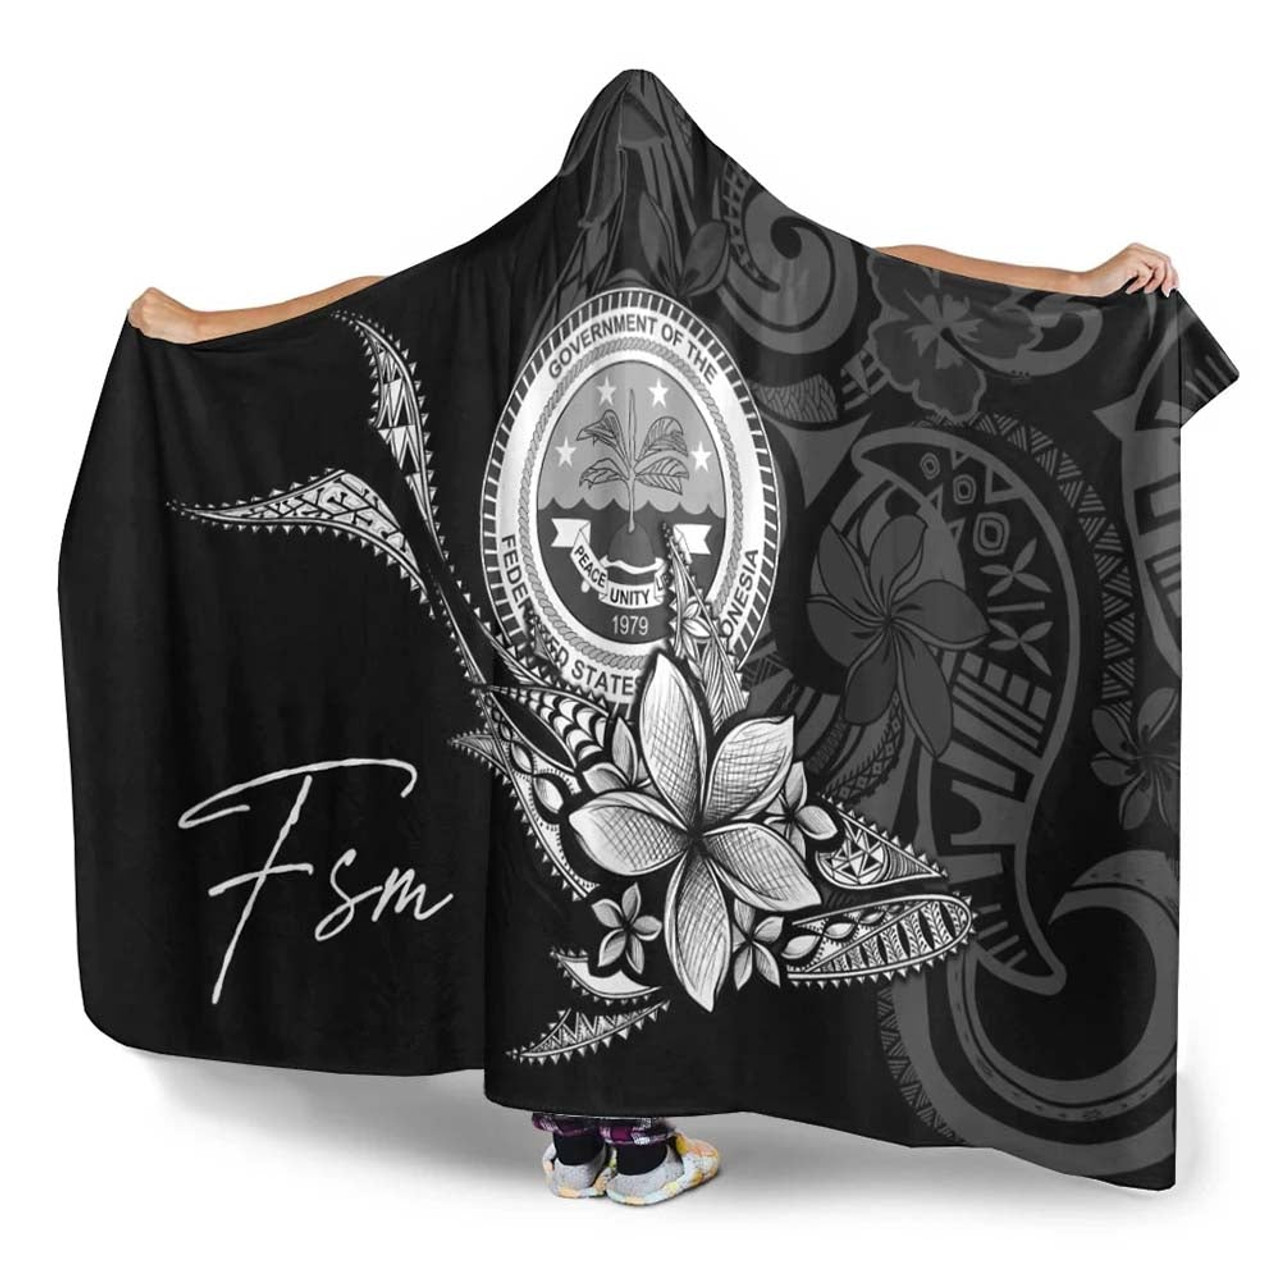 Federated States of Micronesia Hooded Blanket - Fish With Plumeria Flowers Style 3